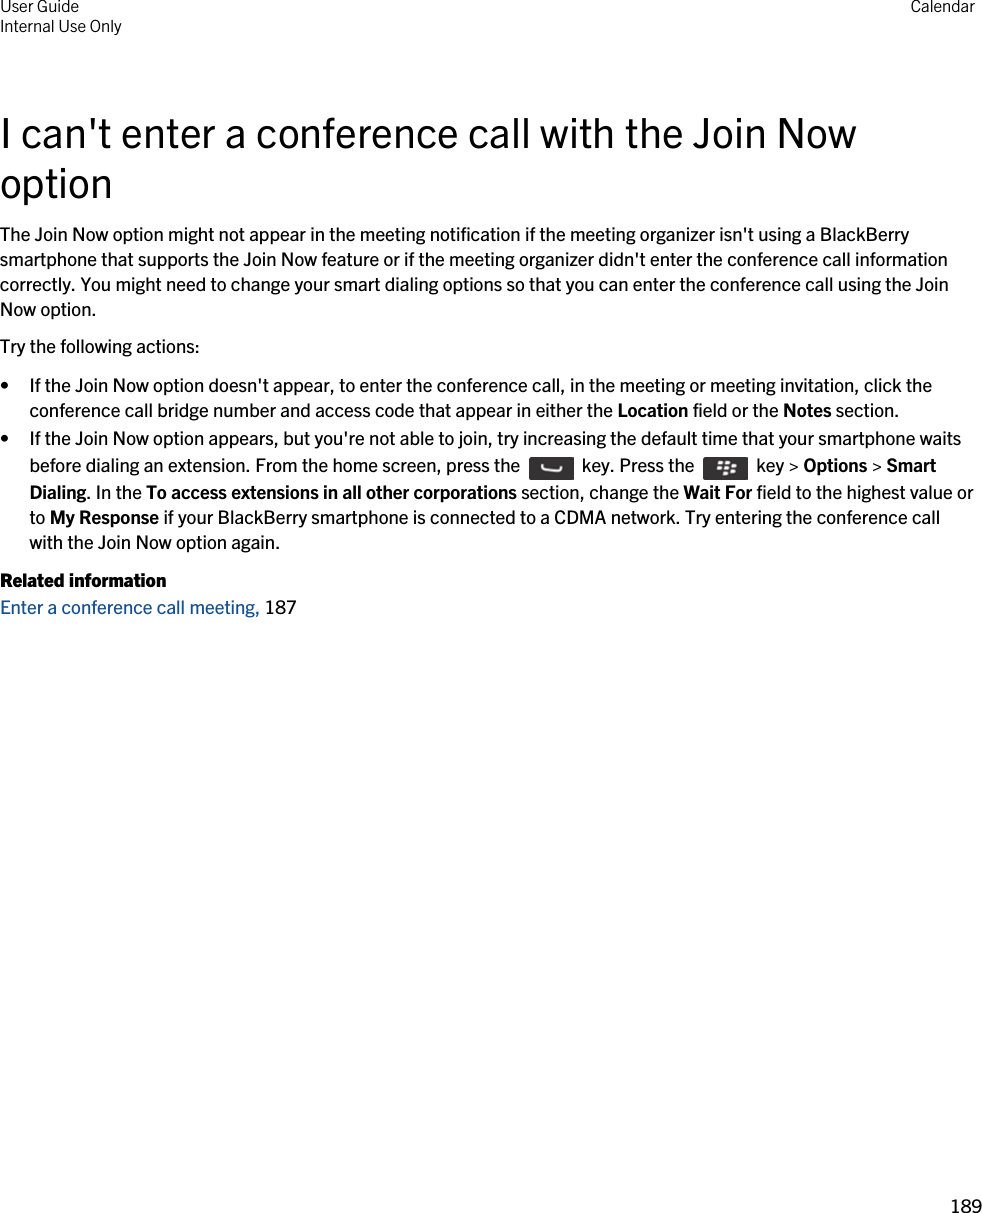 I can&apos;t enter a conference call with the Join Now optionThe Join Now option might not appear in the meeting notification if the meeting organizer isn&apos;t using a BlackBerry smartphone that supports the Join Now feature or if the meeting organizer didn&apos;t enter the conference call information correctly. You might need to change your smart dialing options so that you can enter the conference call using the Join Now option.Try the following actions:• If the Join Now option doesn&apos;t appear, to enter the conference call, in the meeting or meeting invitation, click the conference call bridge number and access code that appear in either the Location field or the Notes section.• If the Join Now option appears, but you&apos;re not able to join, try increasing the default time that your smartphone waits before dialing an extension. From the home screen, press the    key. Press the    key &gt; Options &gt; Smart Dialing. In the To access extensions in all other corporations section, change the Wait For field to the highest value or to My Response if your BlackBerry smartphone is connected to a CDMA network. Try entering the conference call with the Join Now option again.Related informationEnter a conference call meeting, 187 User GuideInternal Use Only Calendar189 